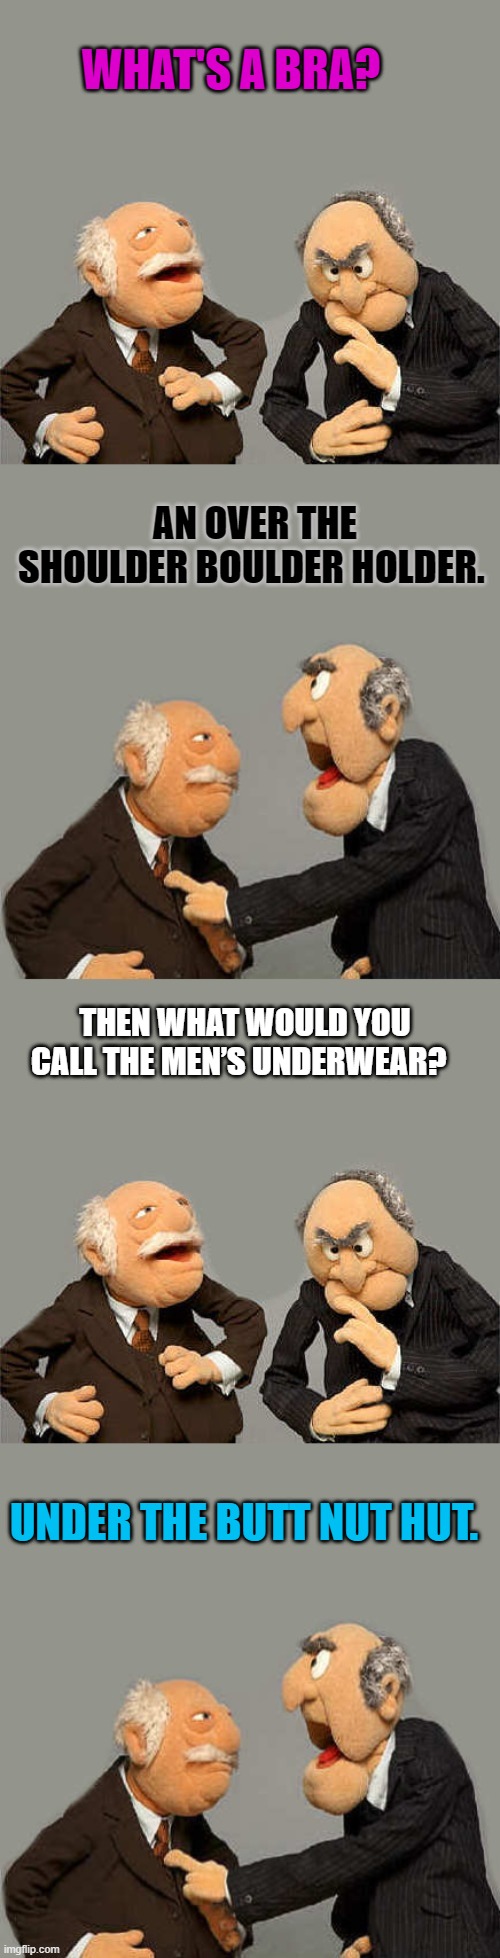 Whats another way to say bra? | WHAT'S A BRA? AN OVER THE SHOULDER BOULDER HOLDER. THEN WHAT WOULD YOU CALL THE MEN’S UNDERWEAR? UNDER THE BUTT NUT HUT. | image tagged in bra,nut hut | made w/ Imgflip meme maker